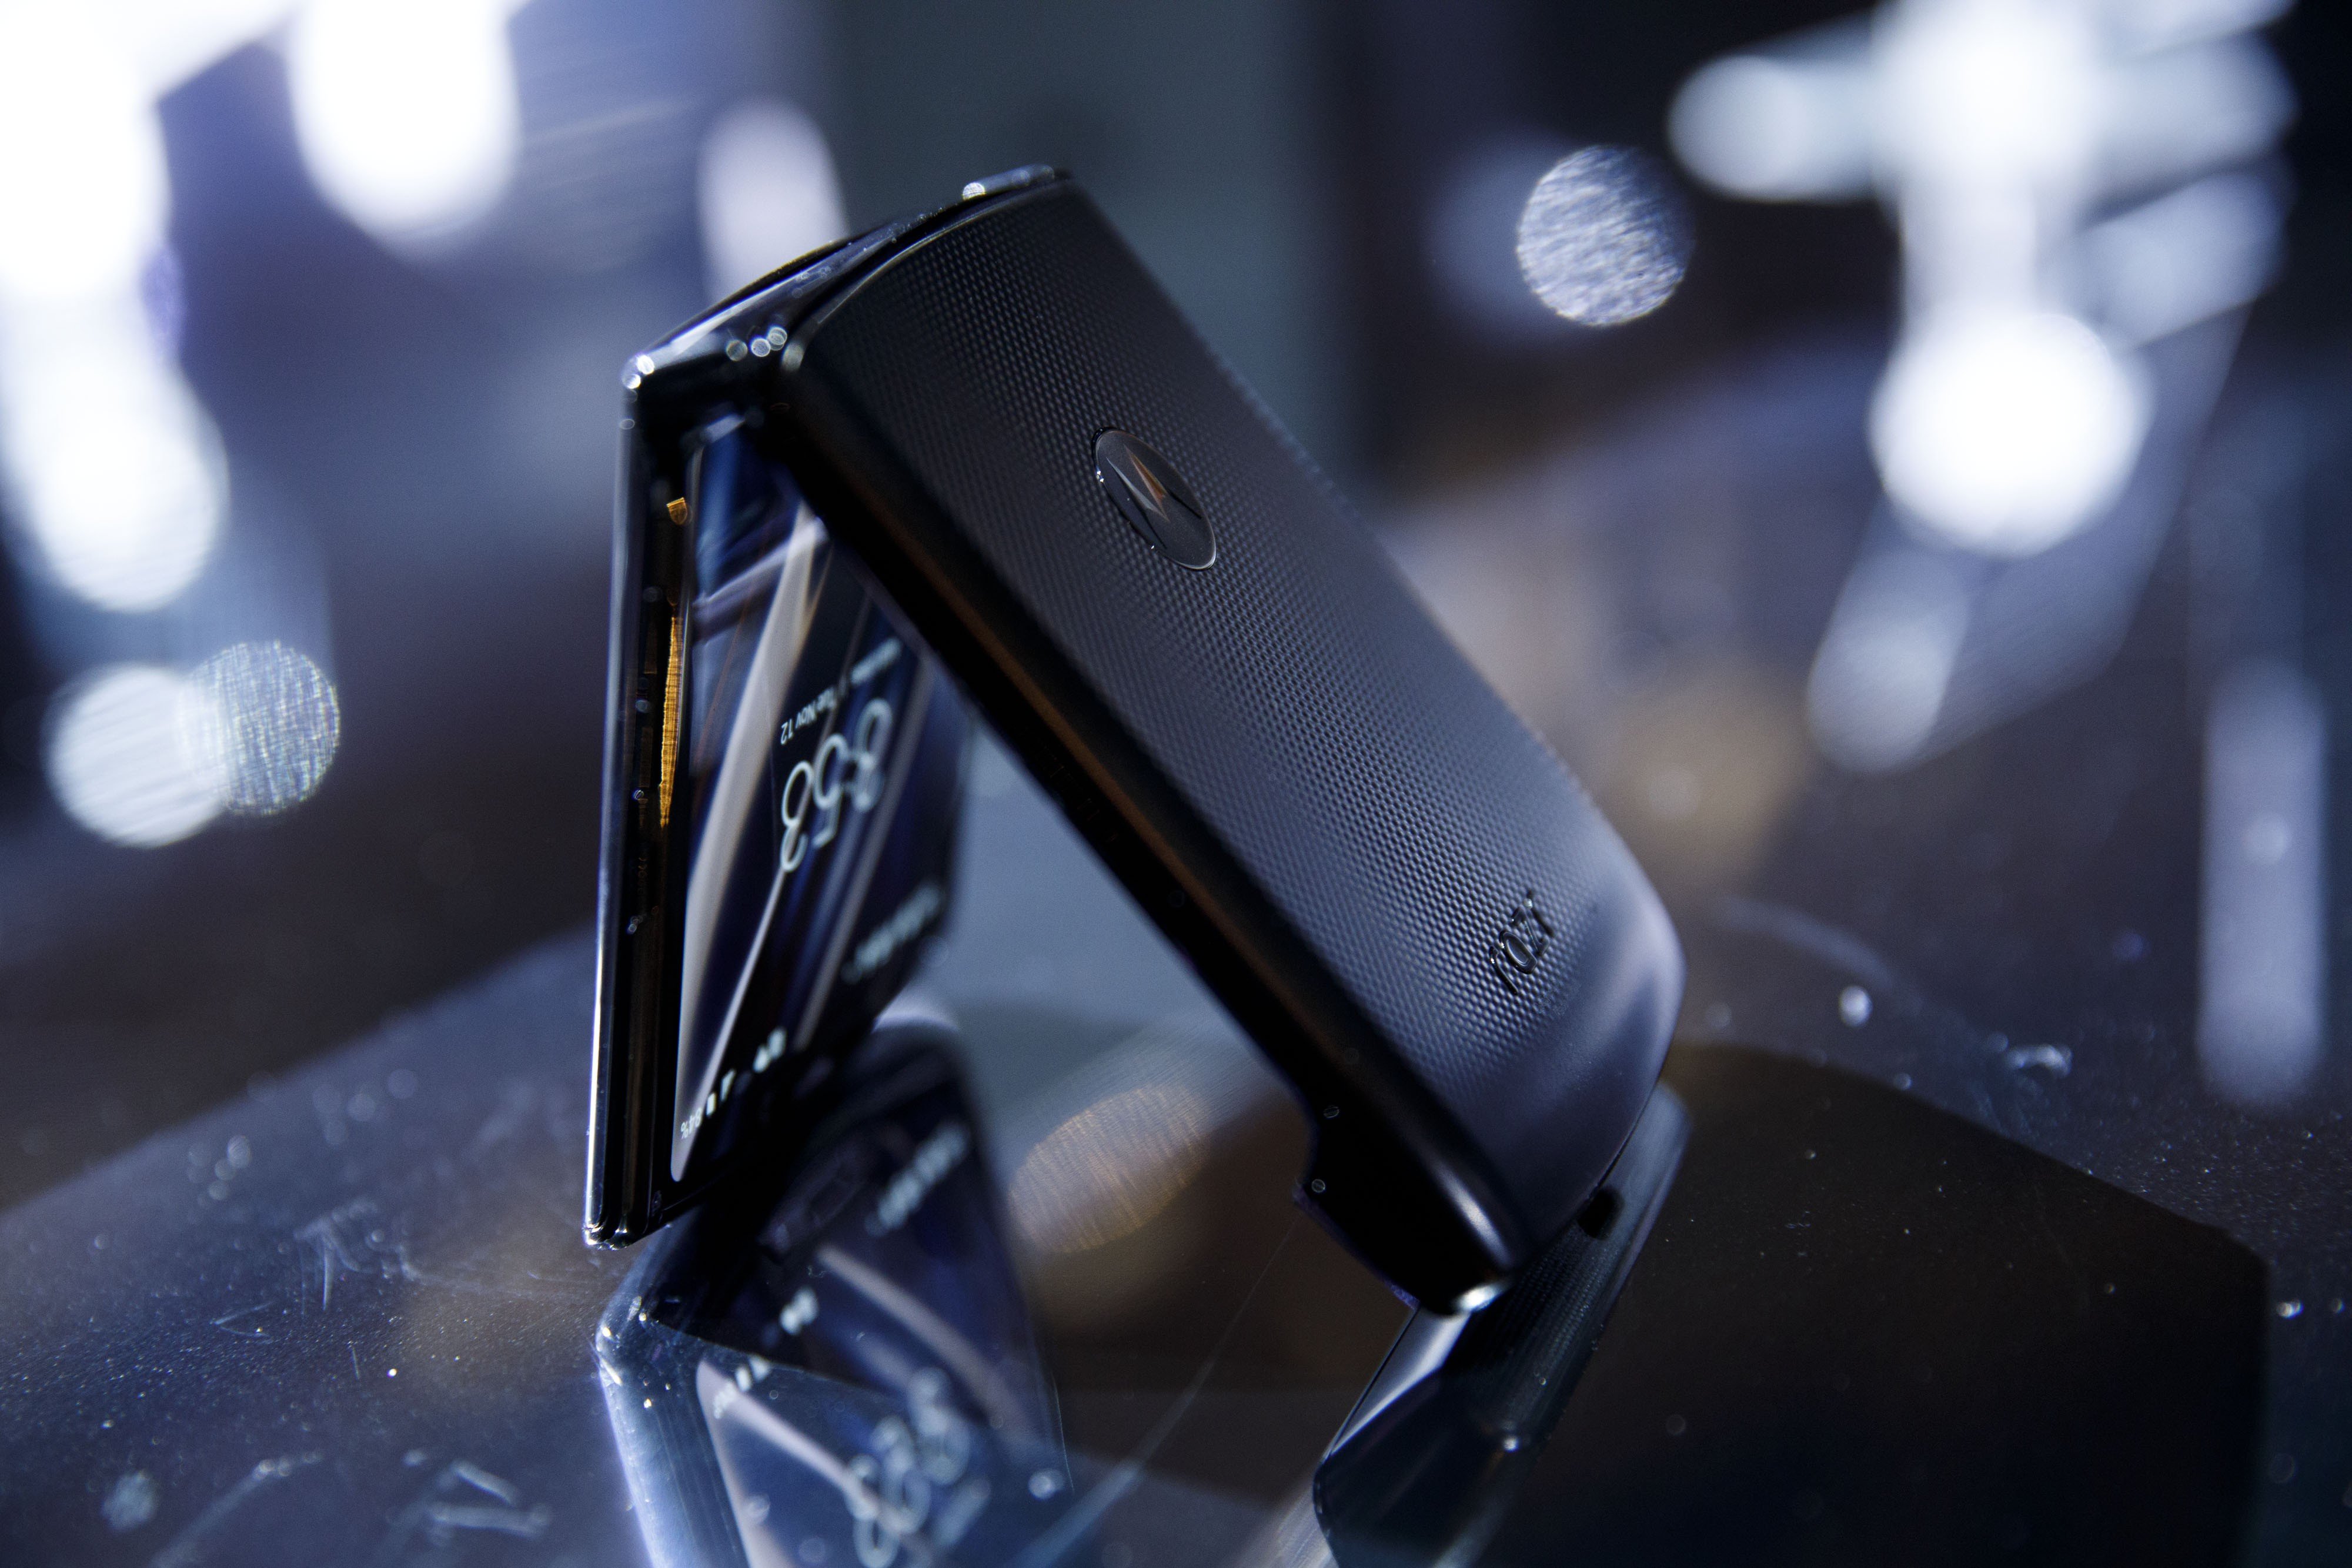 Motorola is bringing back the Razr flip phone 15 years after it debuted, rebooting it as a foldable smartphone. Photo: Patrick T. Fallon/Bloomberg